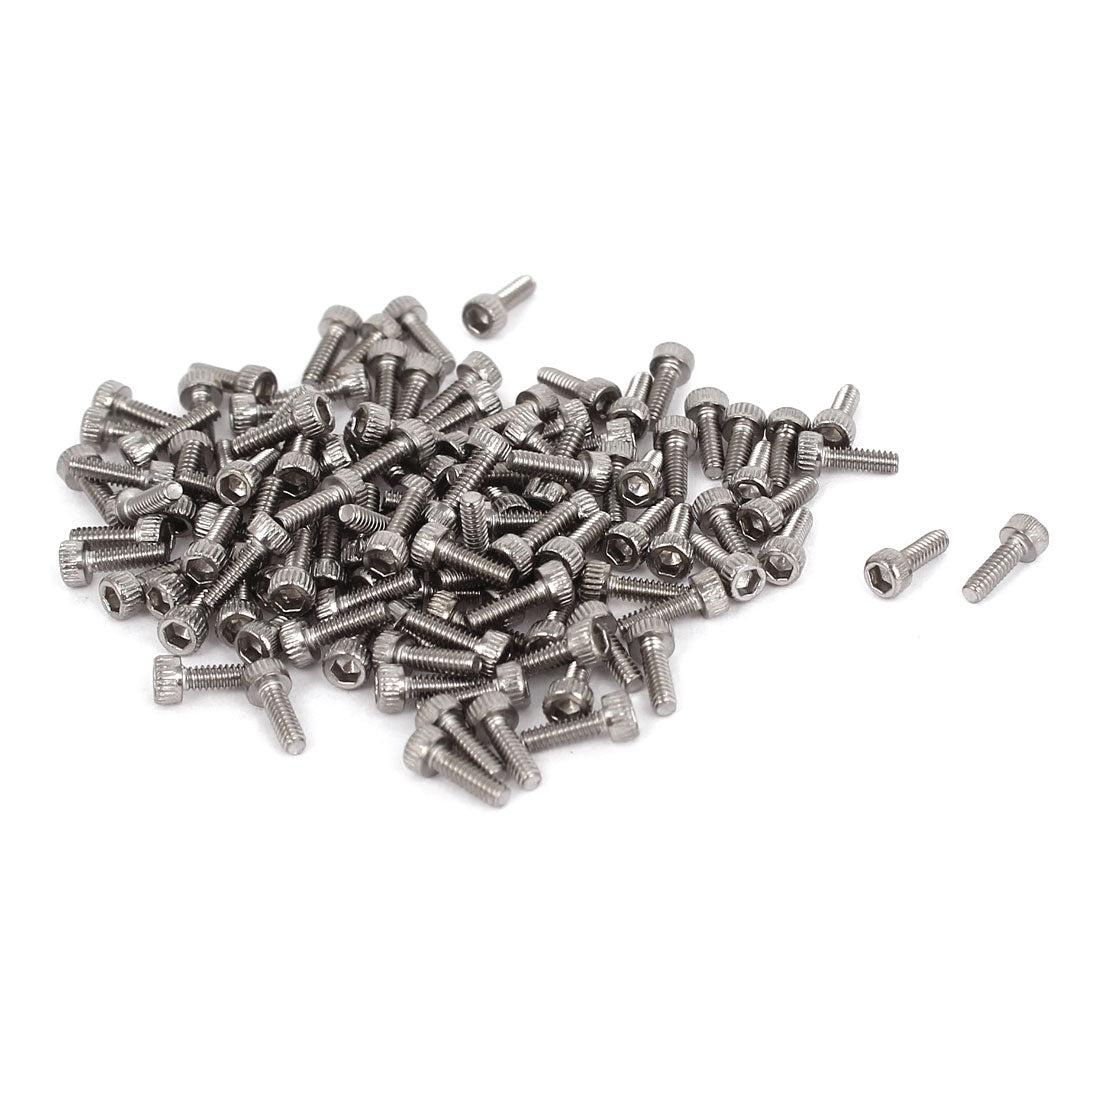 uxcell Uxcell 100pcs 6mm Long M1.6x5mm Stainless Steel Hex Socket Head Cap Screws 0.35mm Pitch